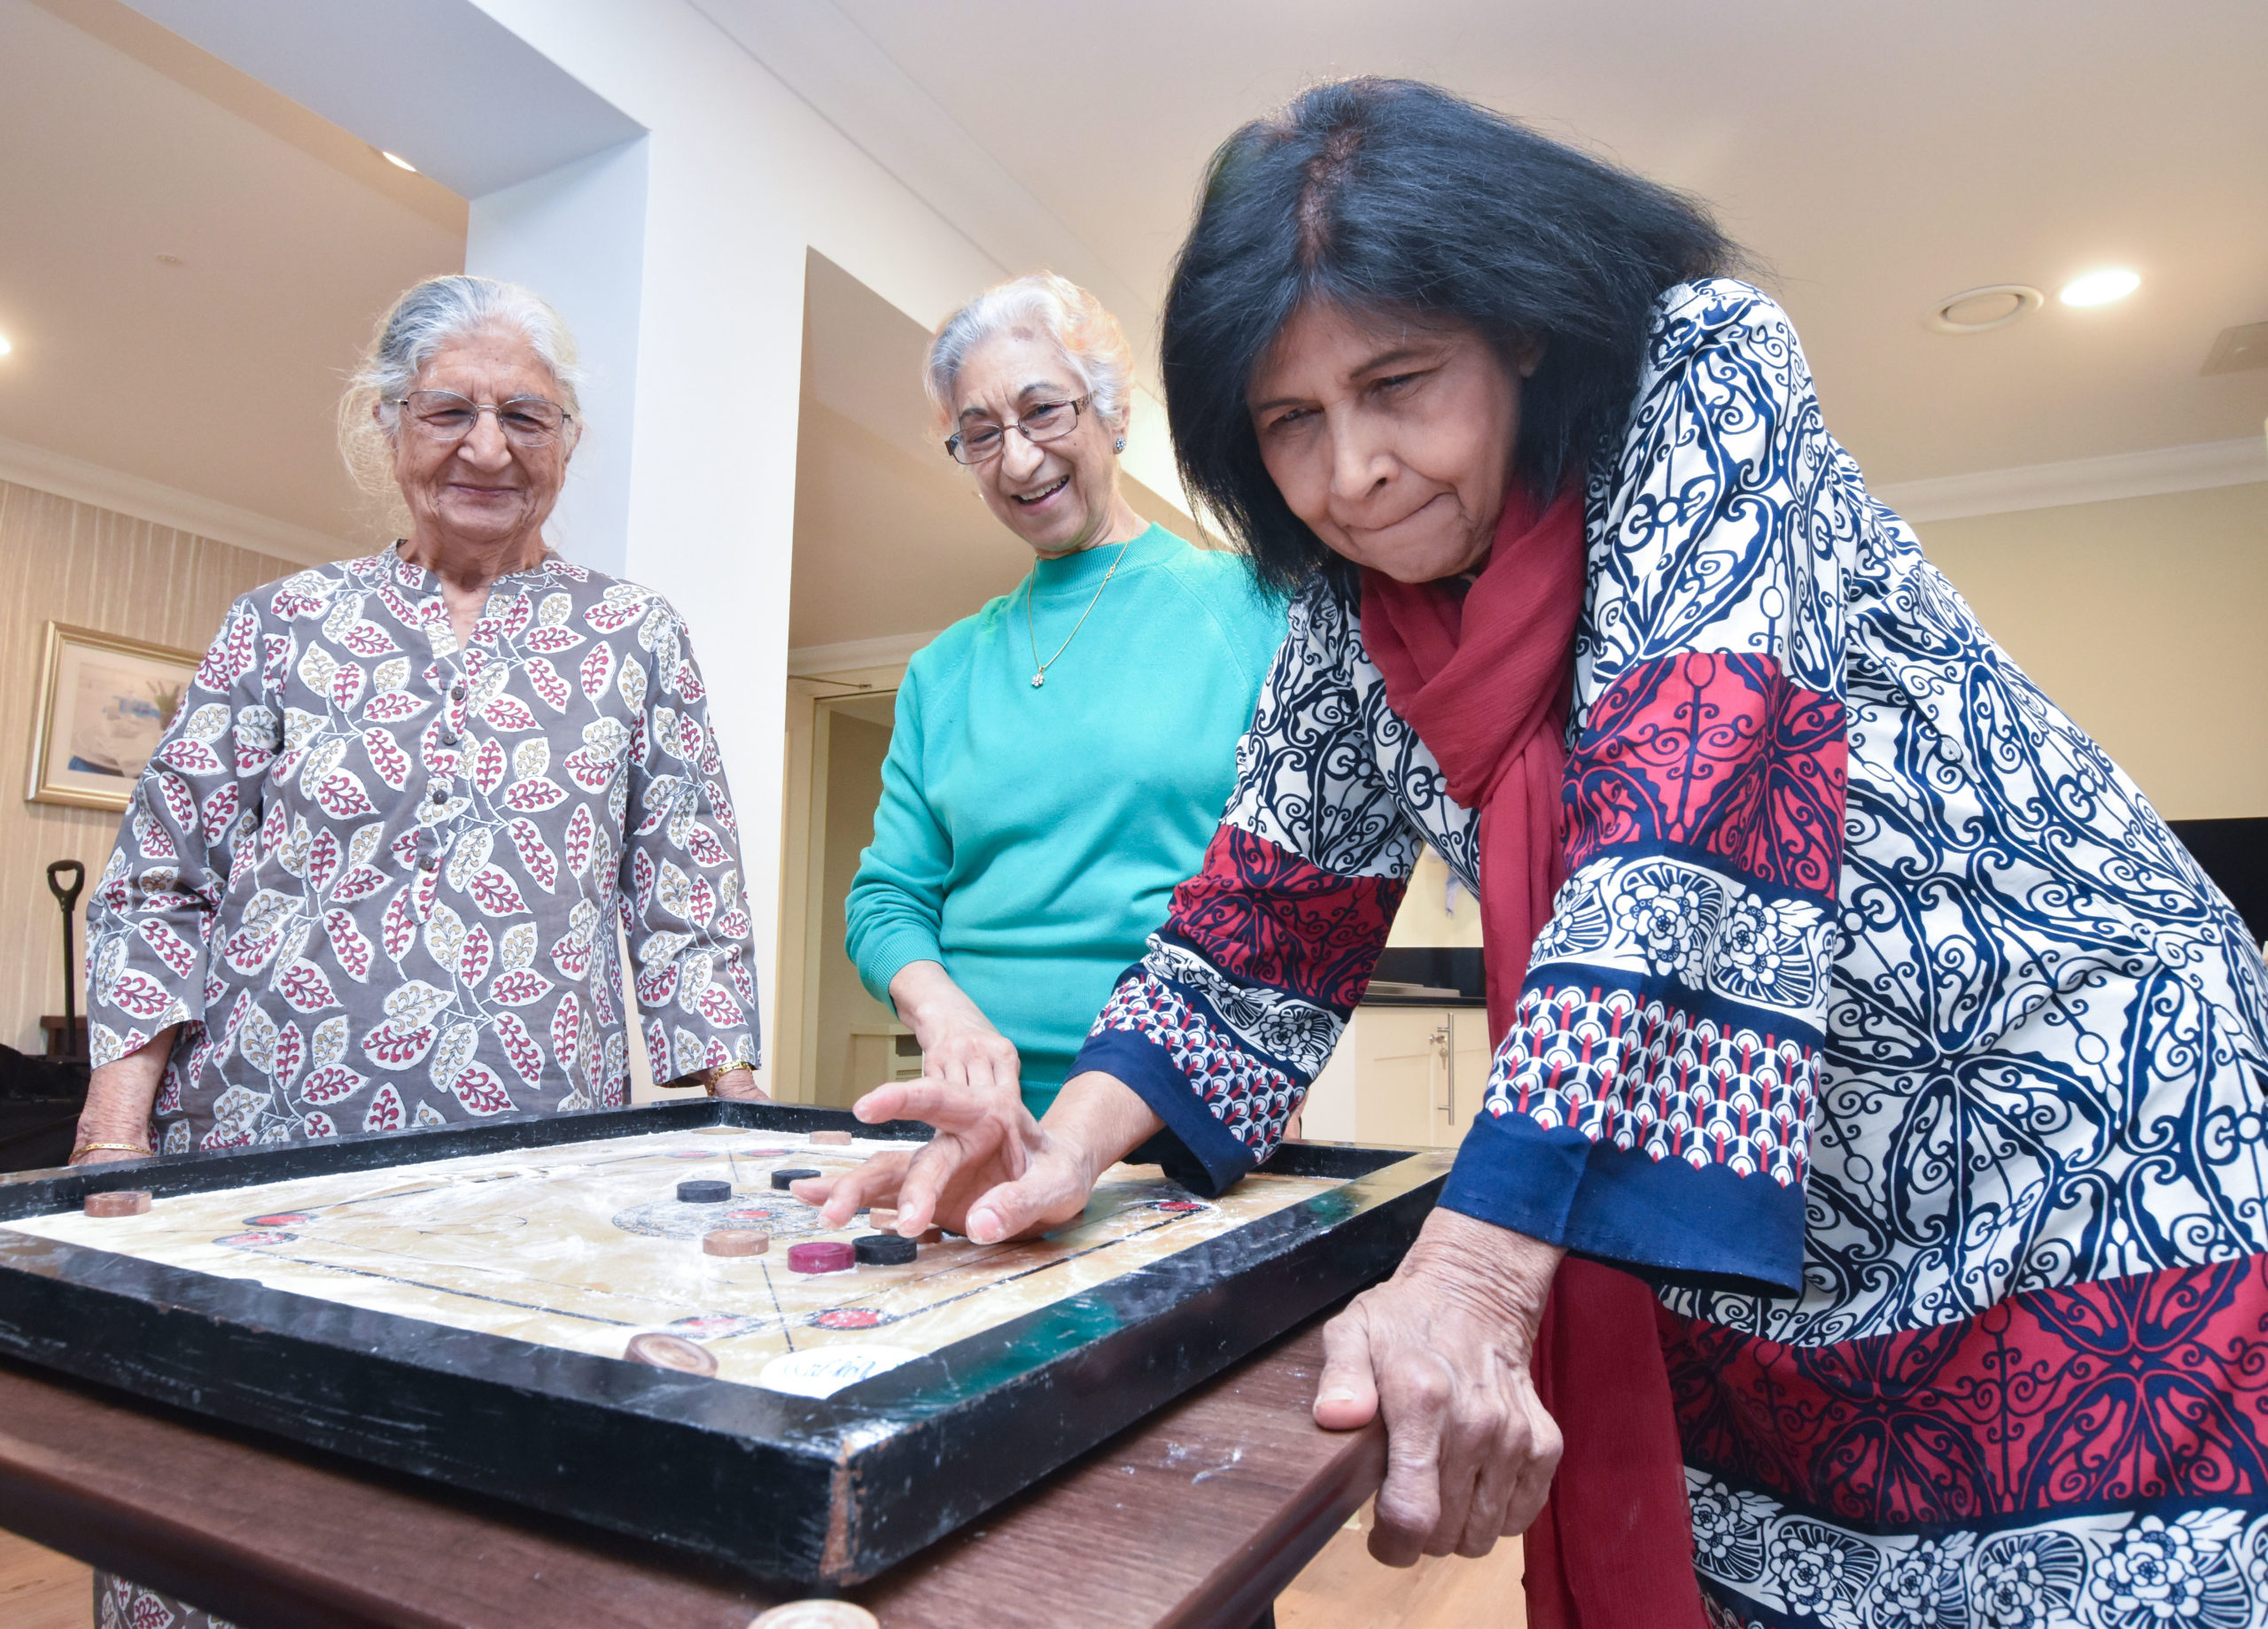 Three members of the Henna group play Carrom - a traditional Indian board game